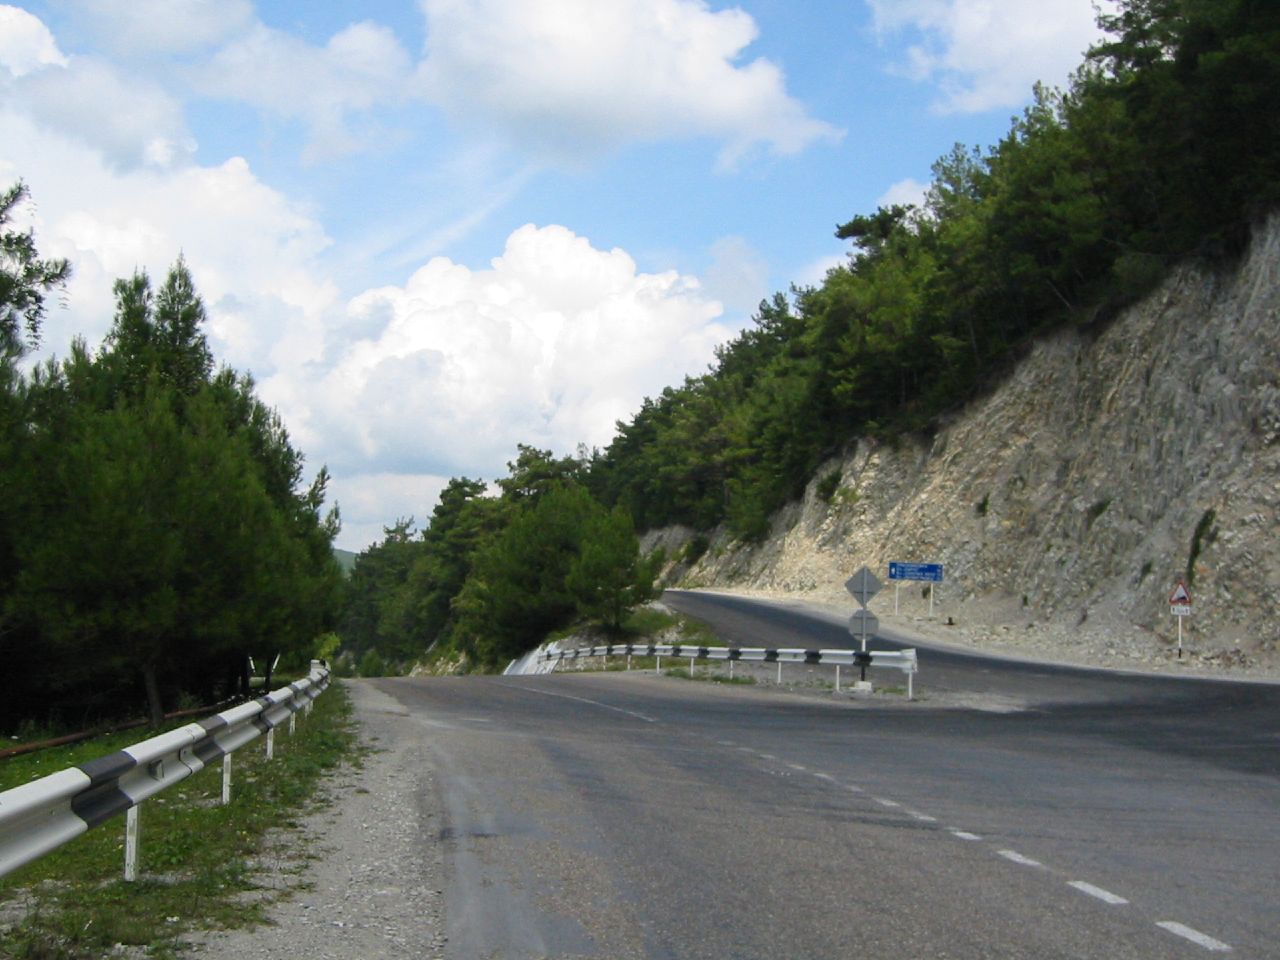 a curved roadway next to some trees on a hill